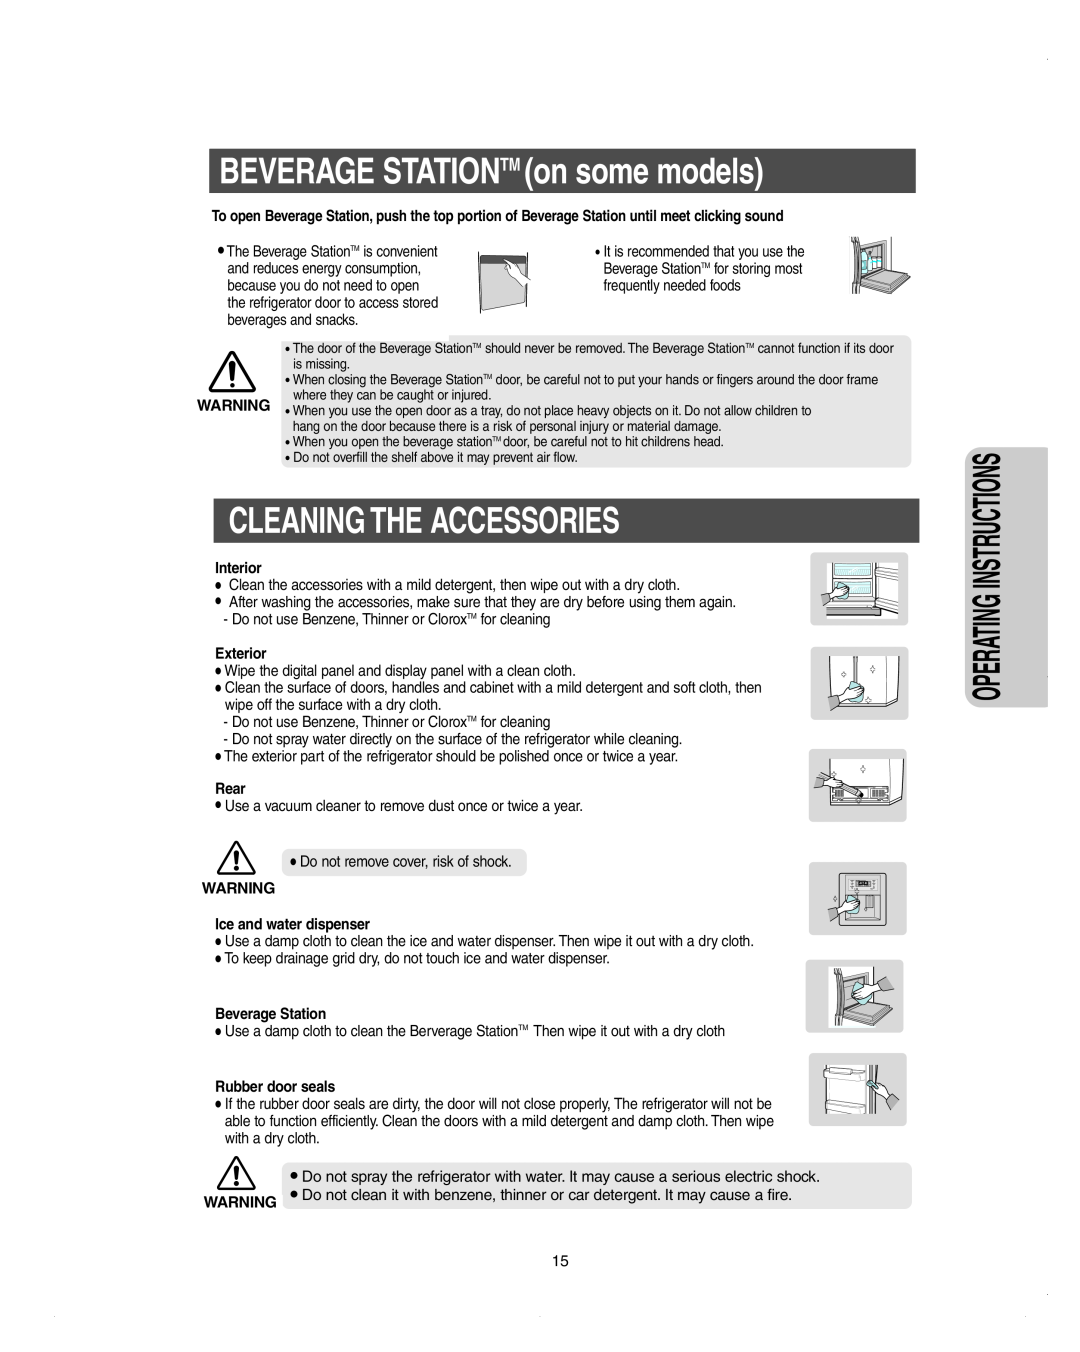 Samsung DA99-01278C owner manual BEVERAGE STATIONTM on some models, Cleaning The Accessories, Interior, Exterior, Rear 